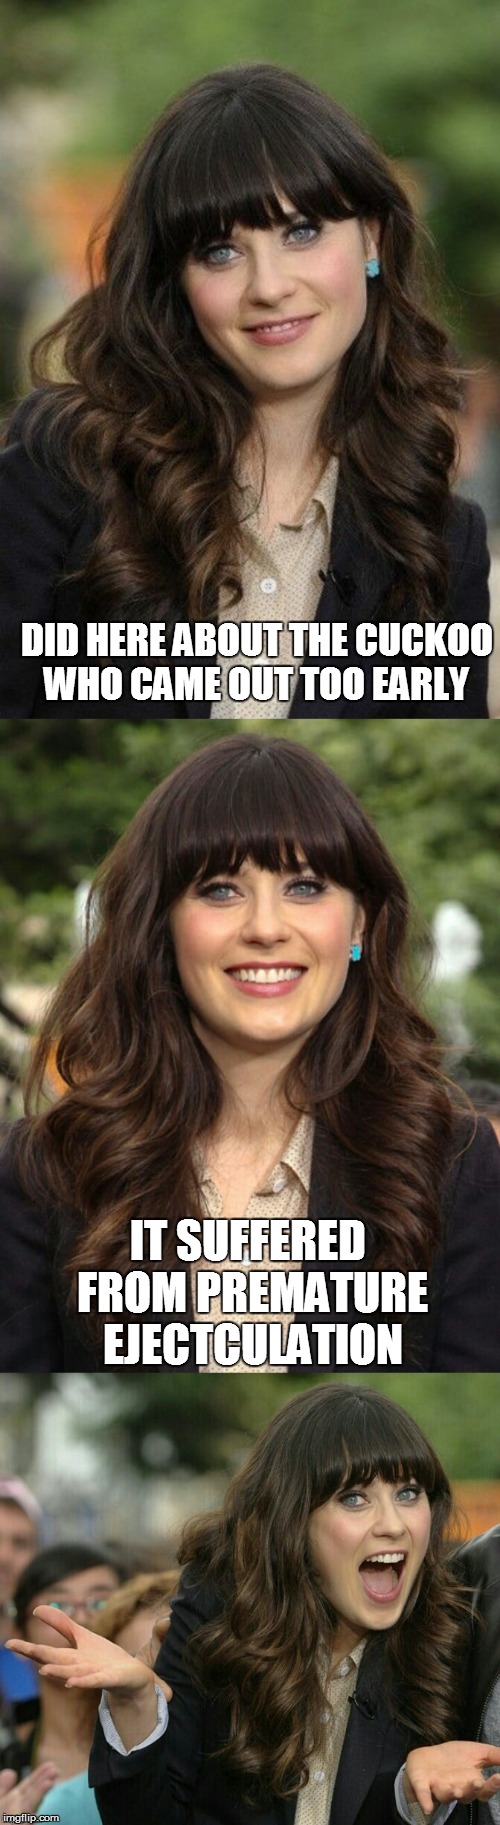 For Chicken week 6-8 april  | DID HERE ABOUT THE CUCKOO WHO CAME OUT TOO EARLY; IT SUFFERED FROM PREMATURE EJECTCULATION | image tagged in zooey deschanel joke template | made w/ Imgflip meme maker